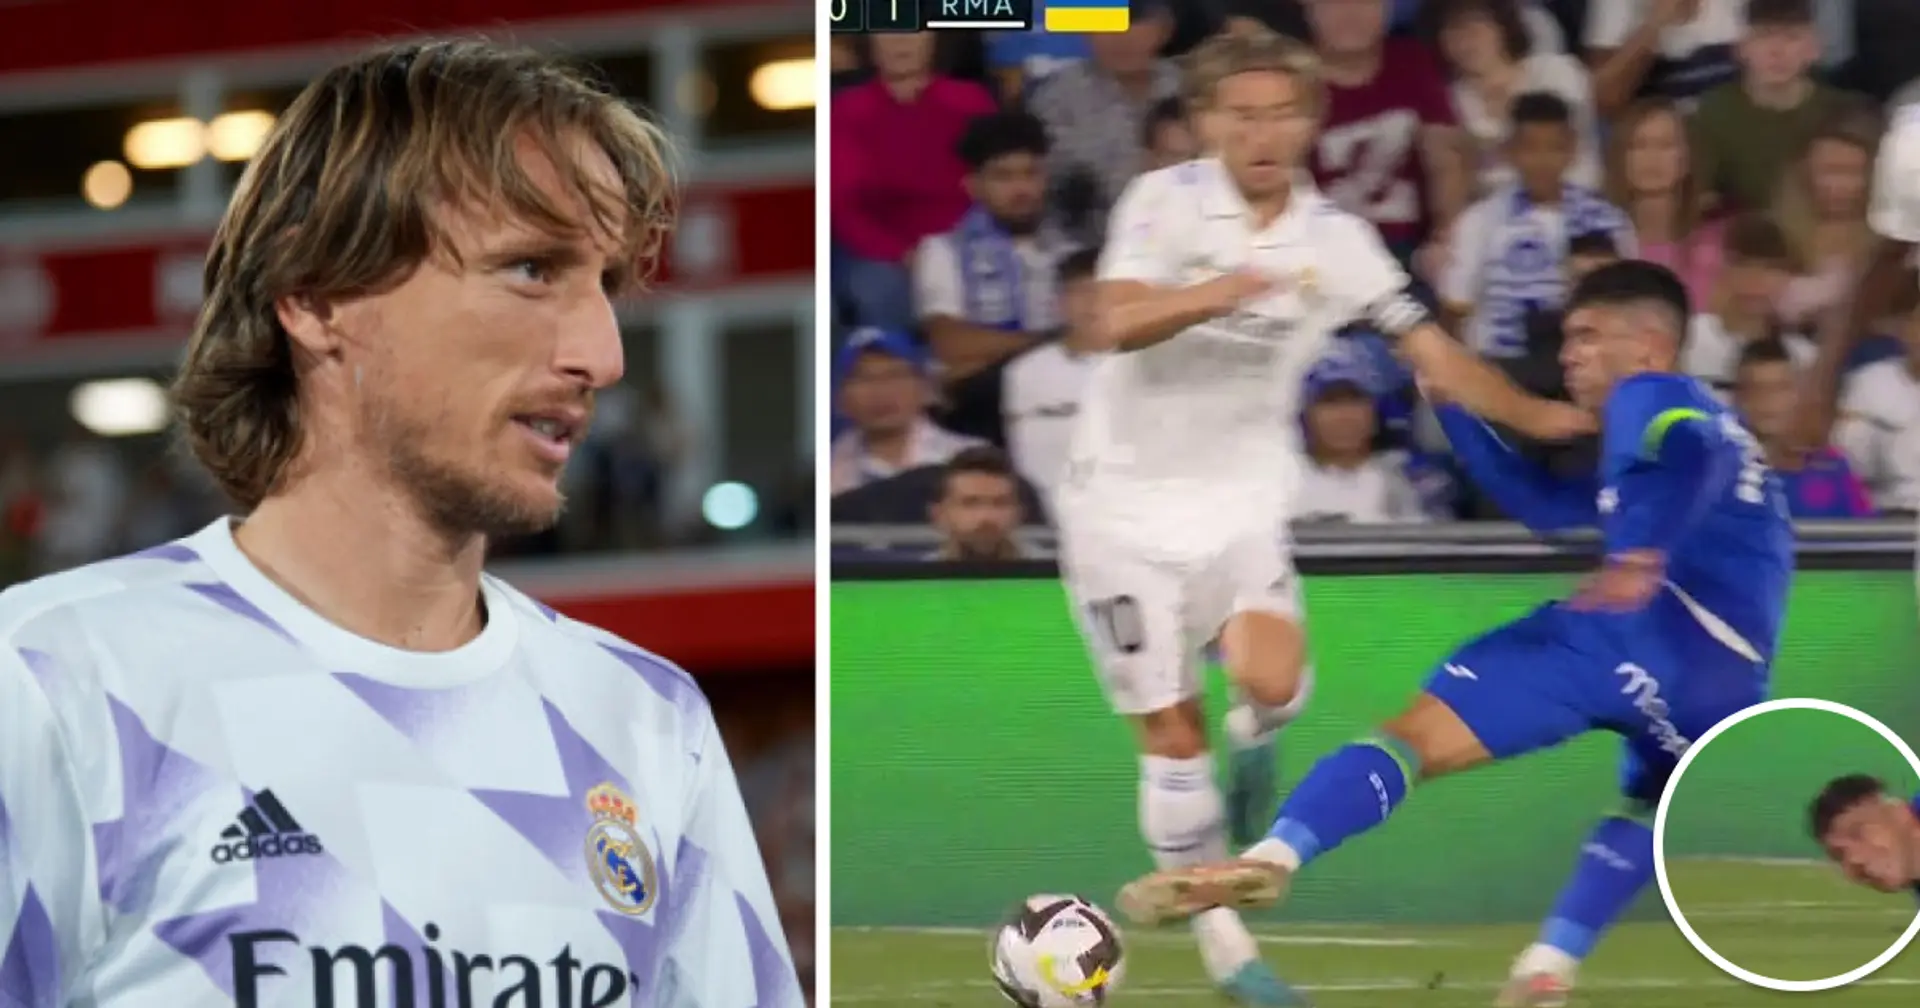 'That's why we call him Godric': one episode in Getafe win shows how good Modric still is at 37